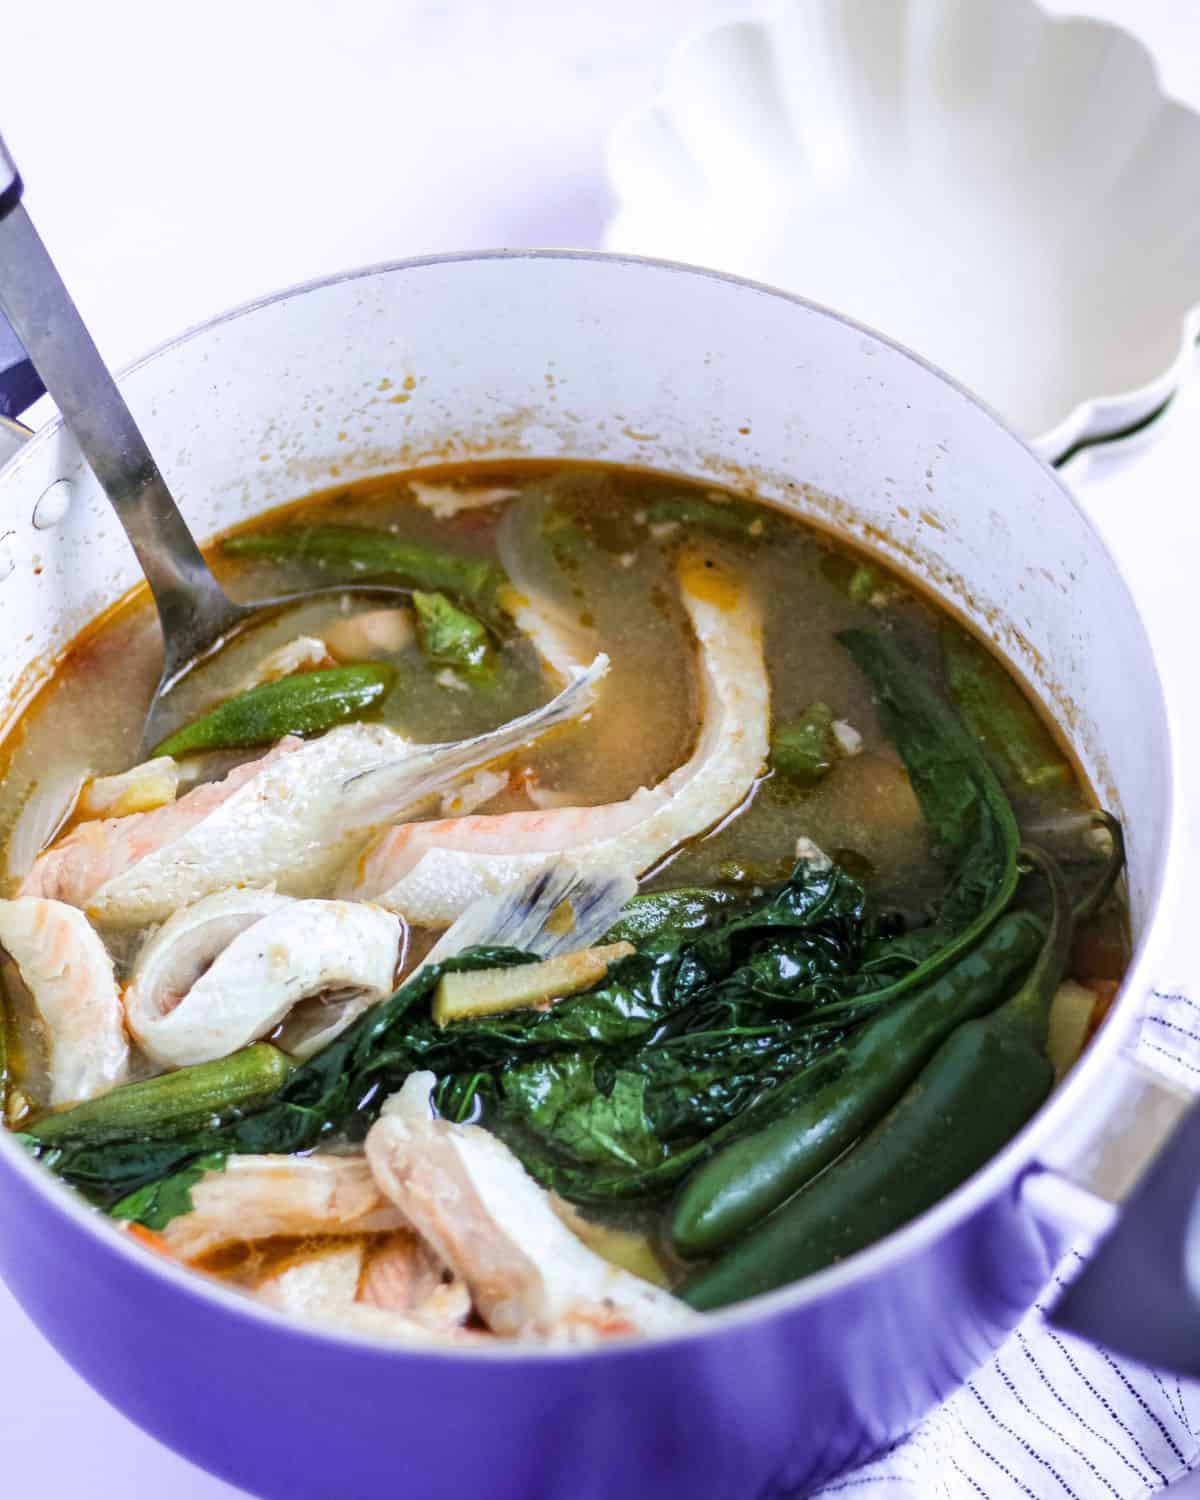 Cooked salmon belly sinigang in a blue pot.